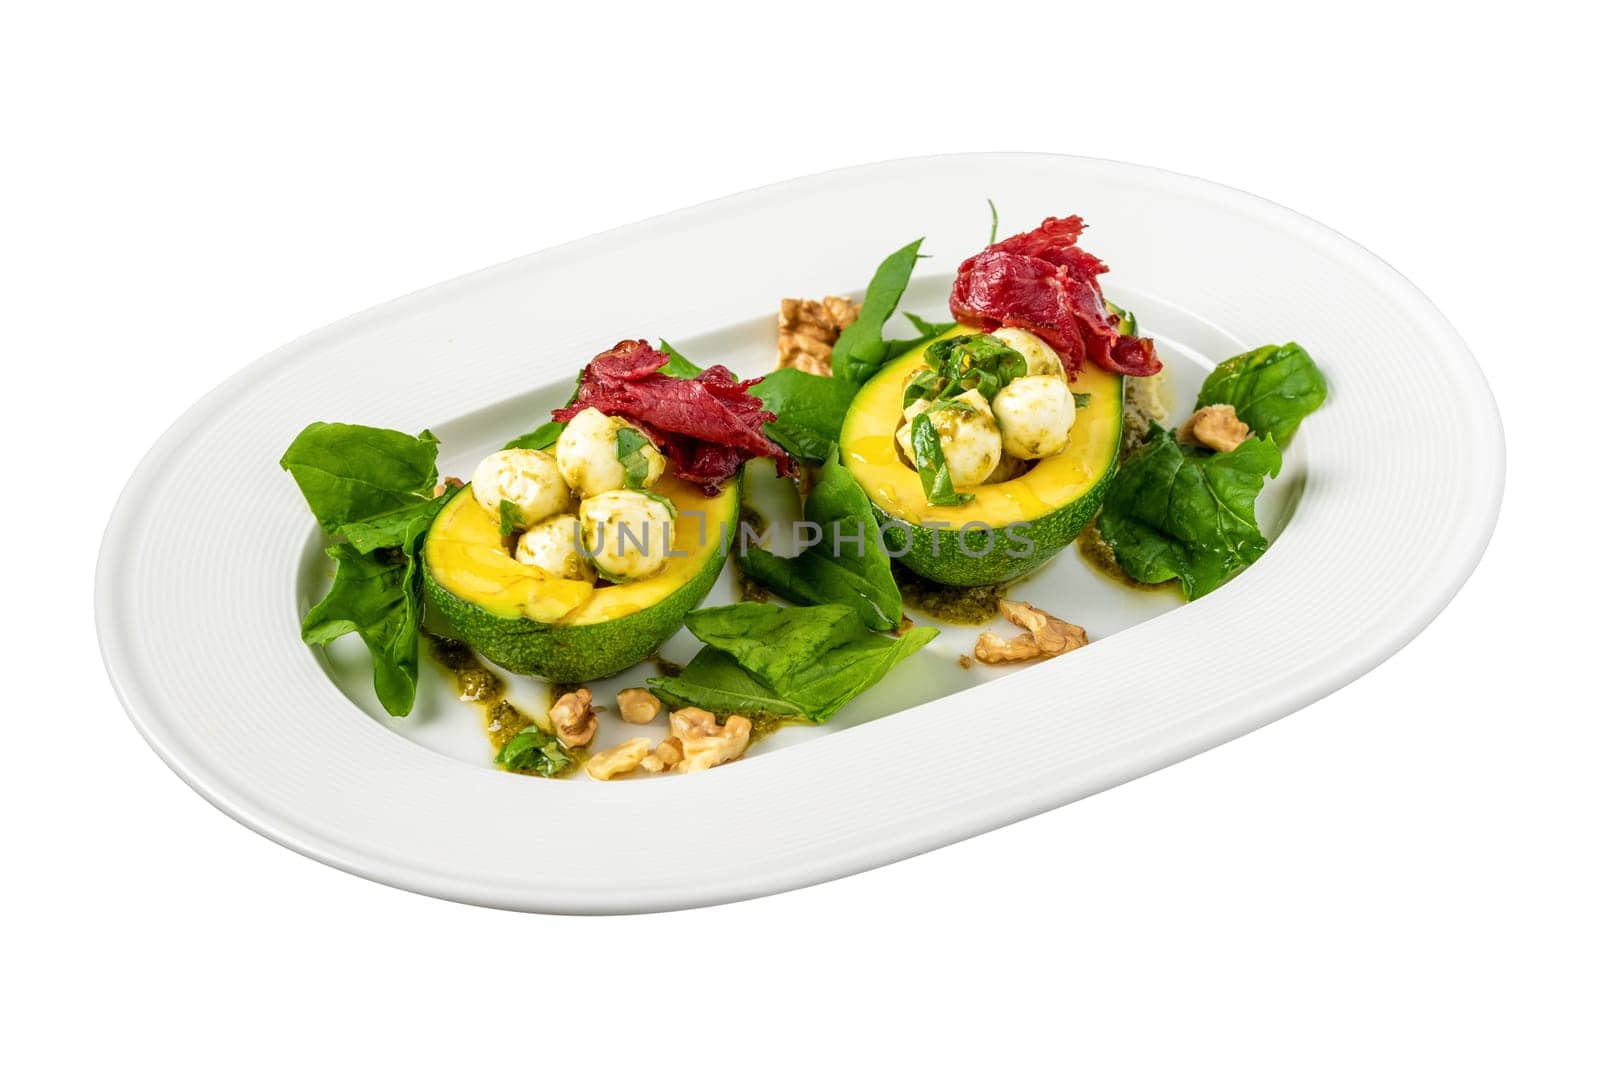 Bocconcini cheese balls in halves of avocado served with salad on white background